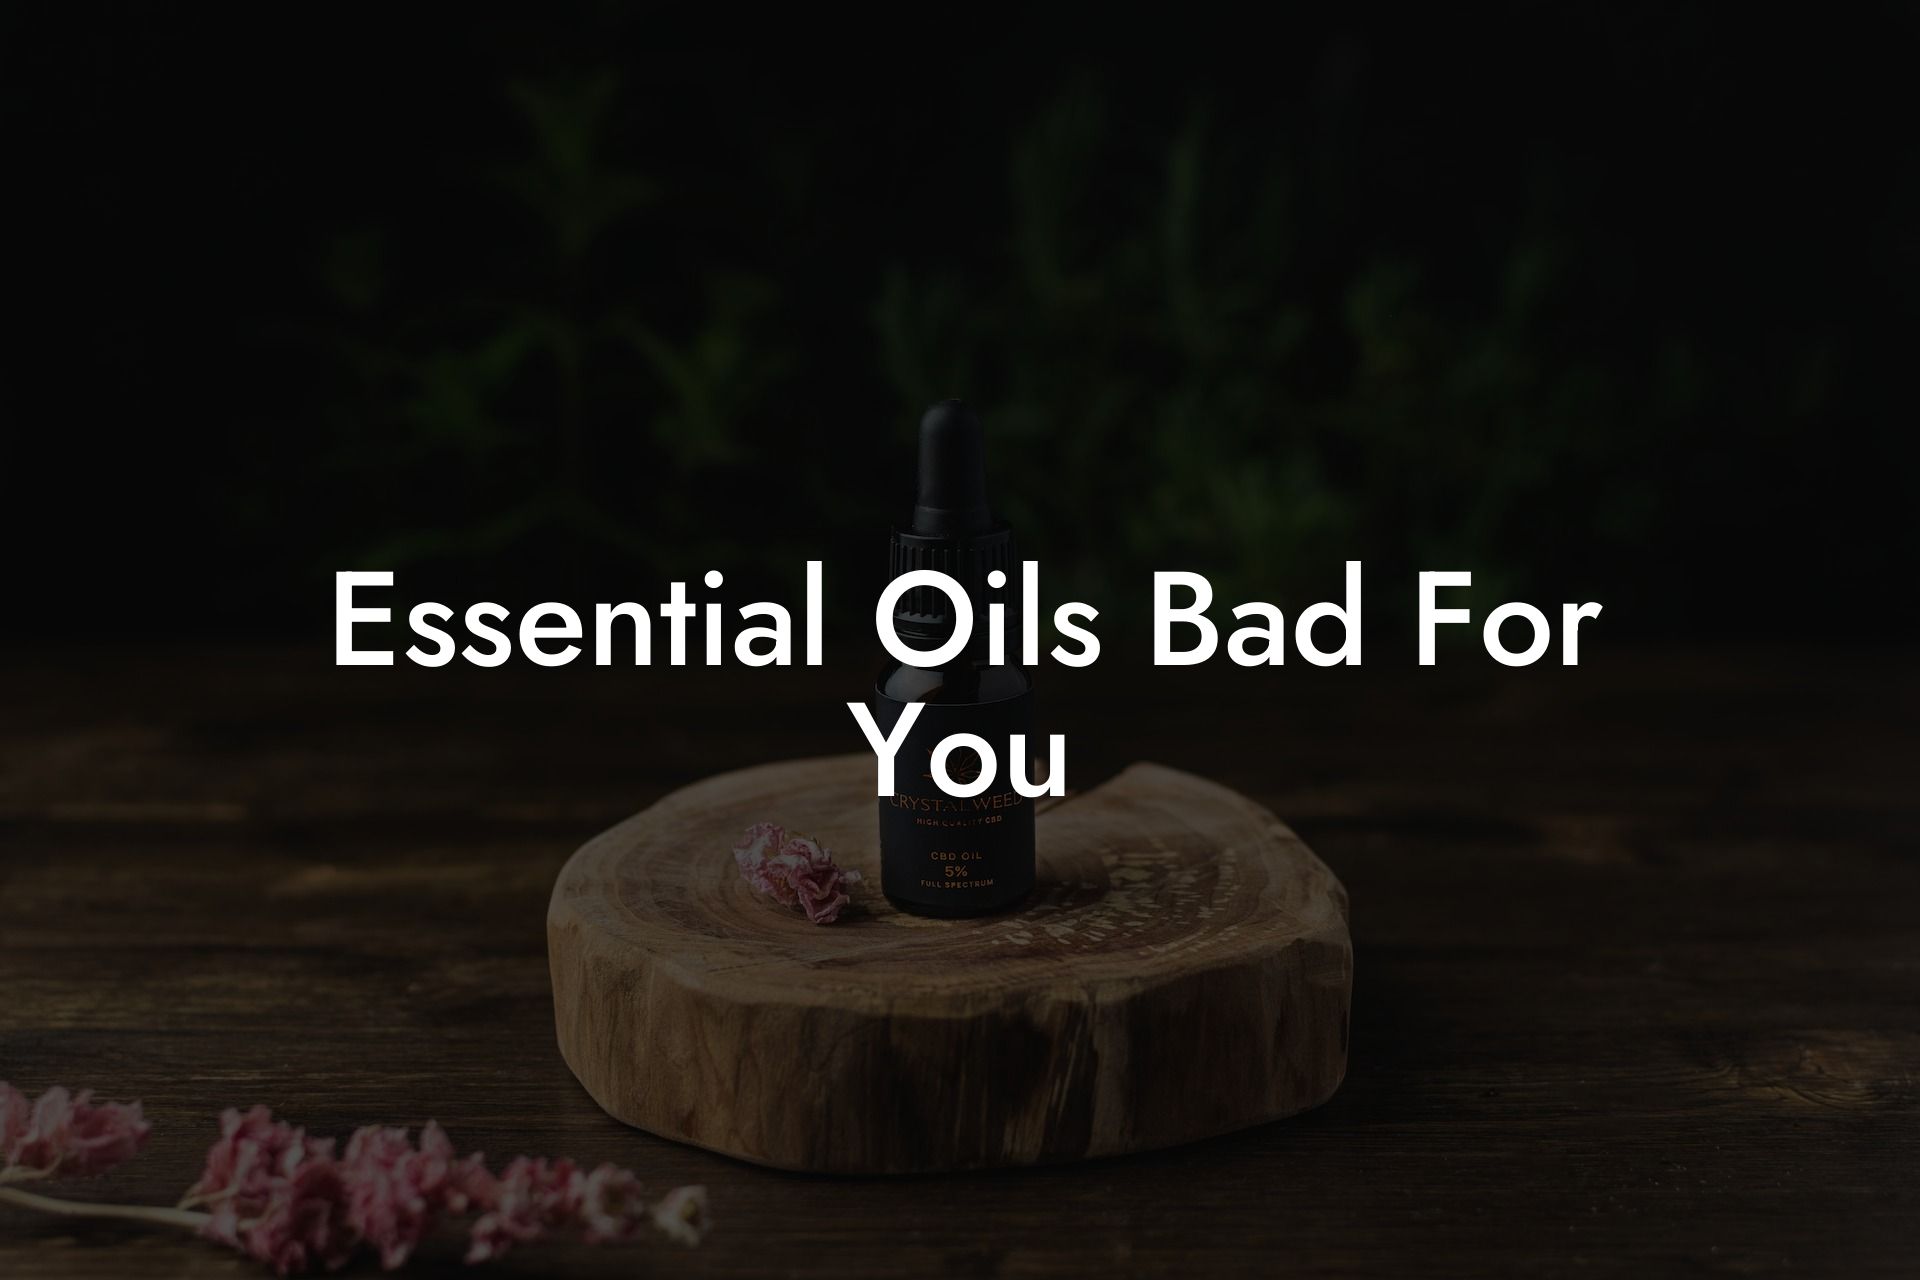 Essential Oils Bad For You